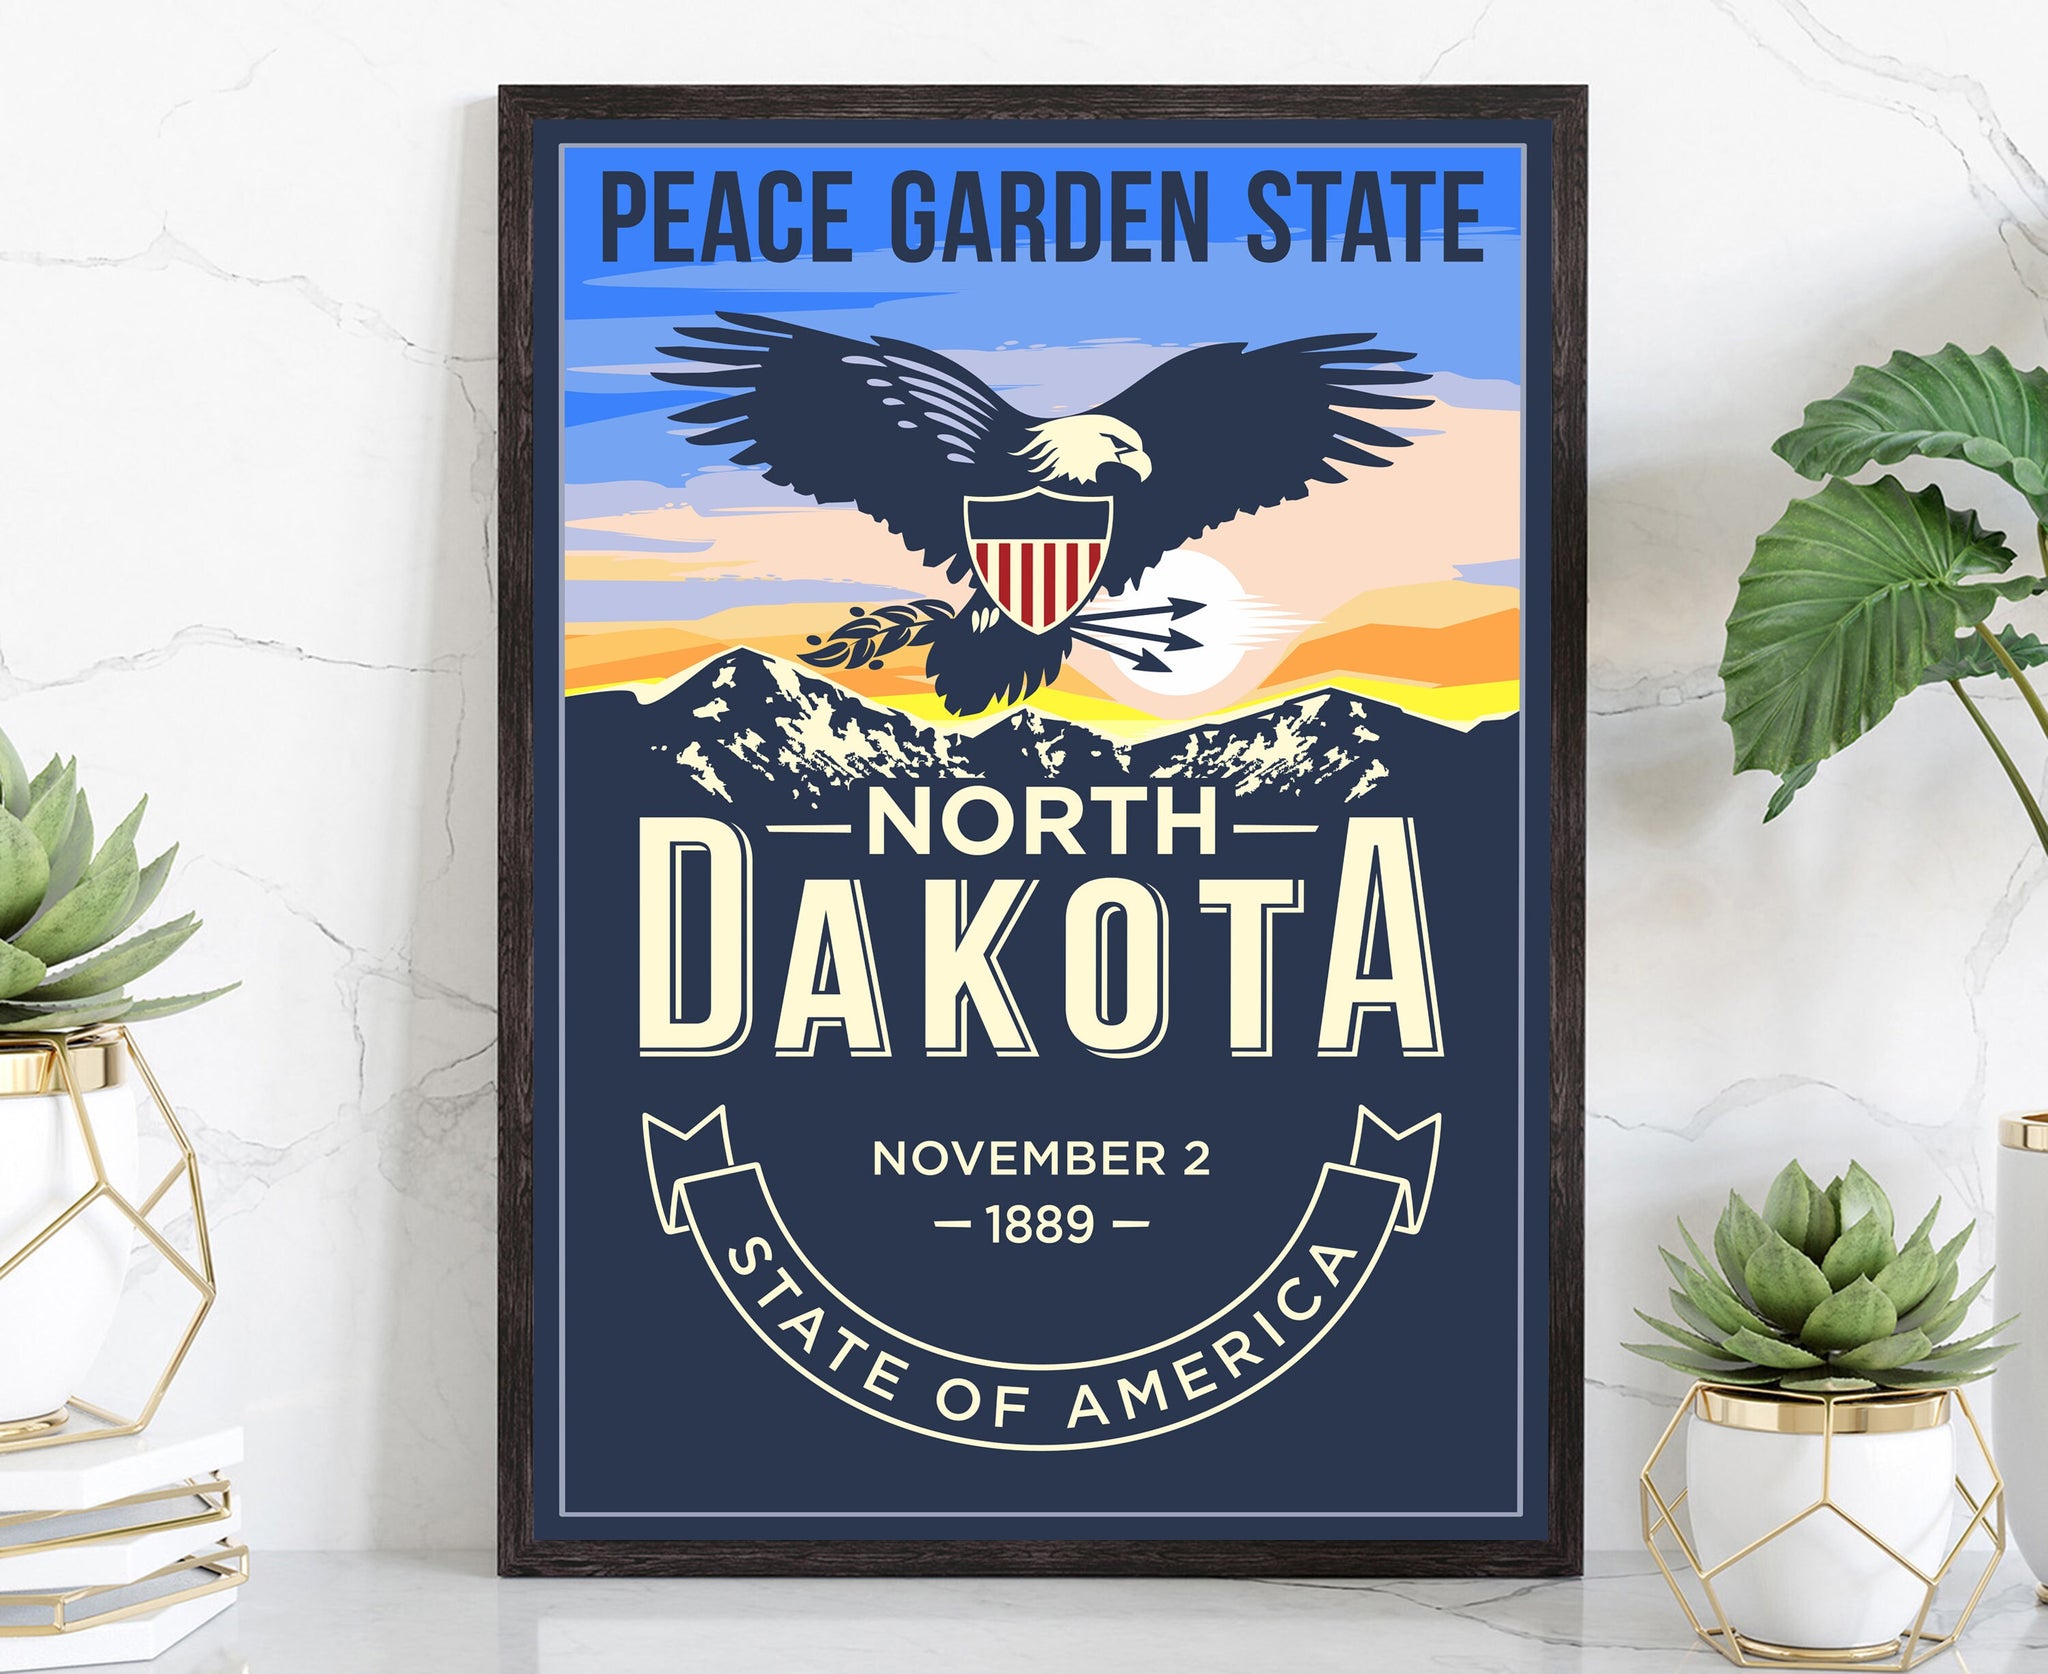 United States Poster, North Dakota State Poster Print, North Dakota State Emblem Poster, Retro Travel State Poster, Home Office Wall Art